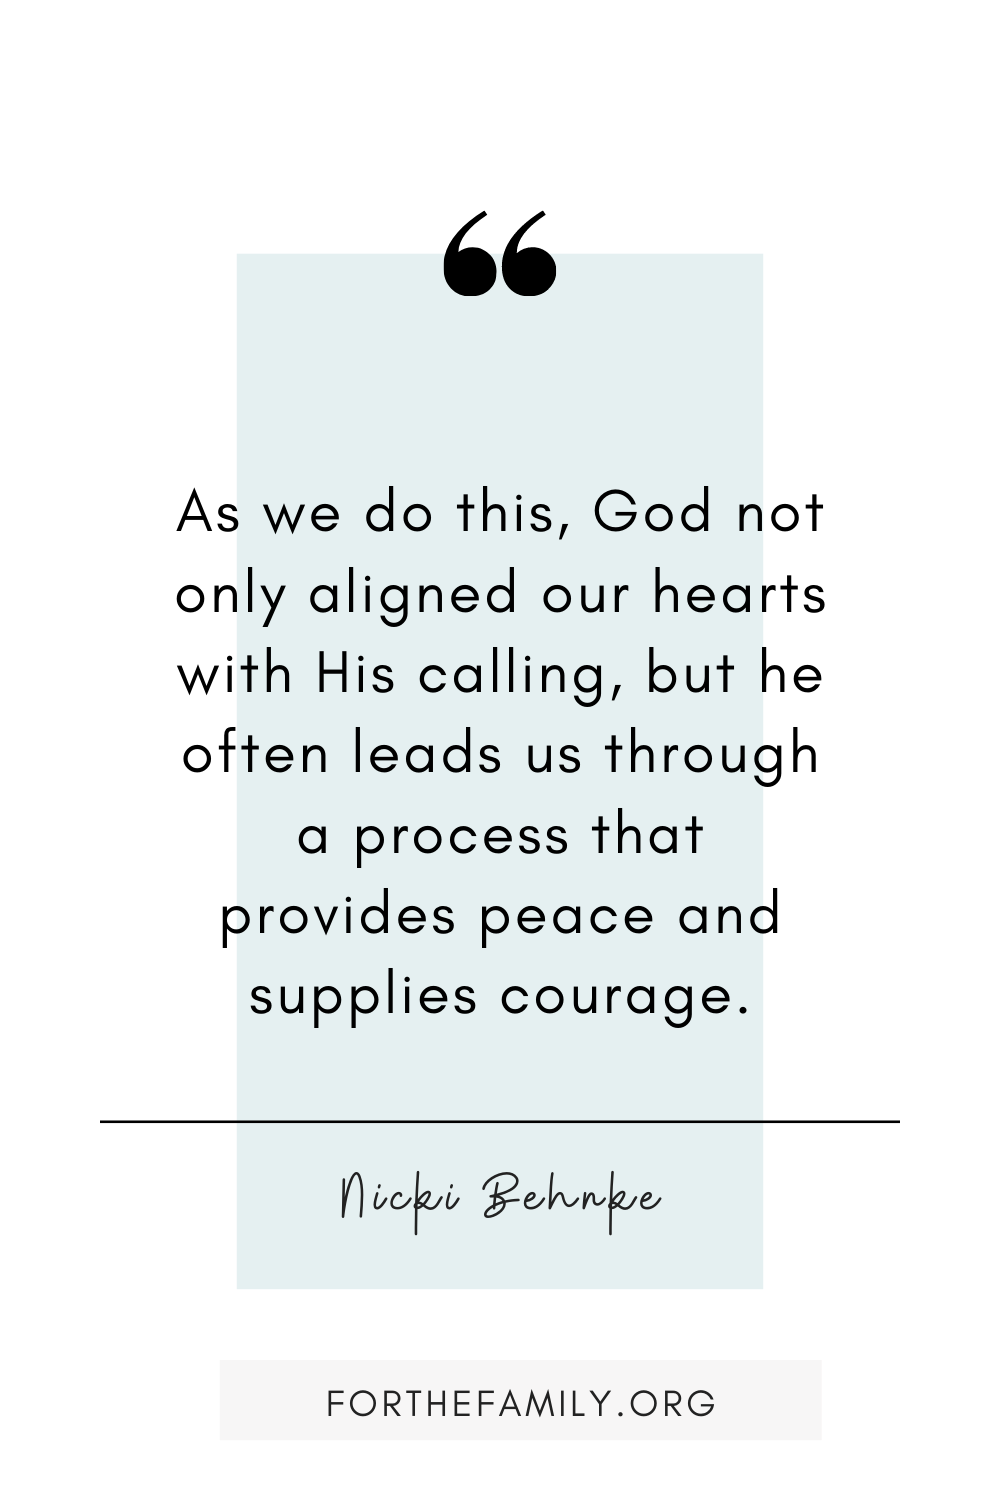 "As we do this, God not only aligned our hearts with His calling, but he often leads us through a process that provides peace and supplies courage." Nicki Behake. forthefamily.com